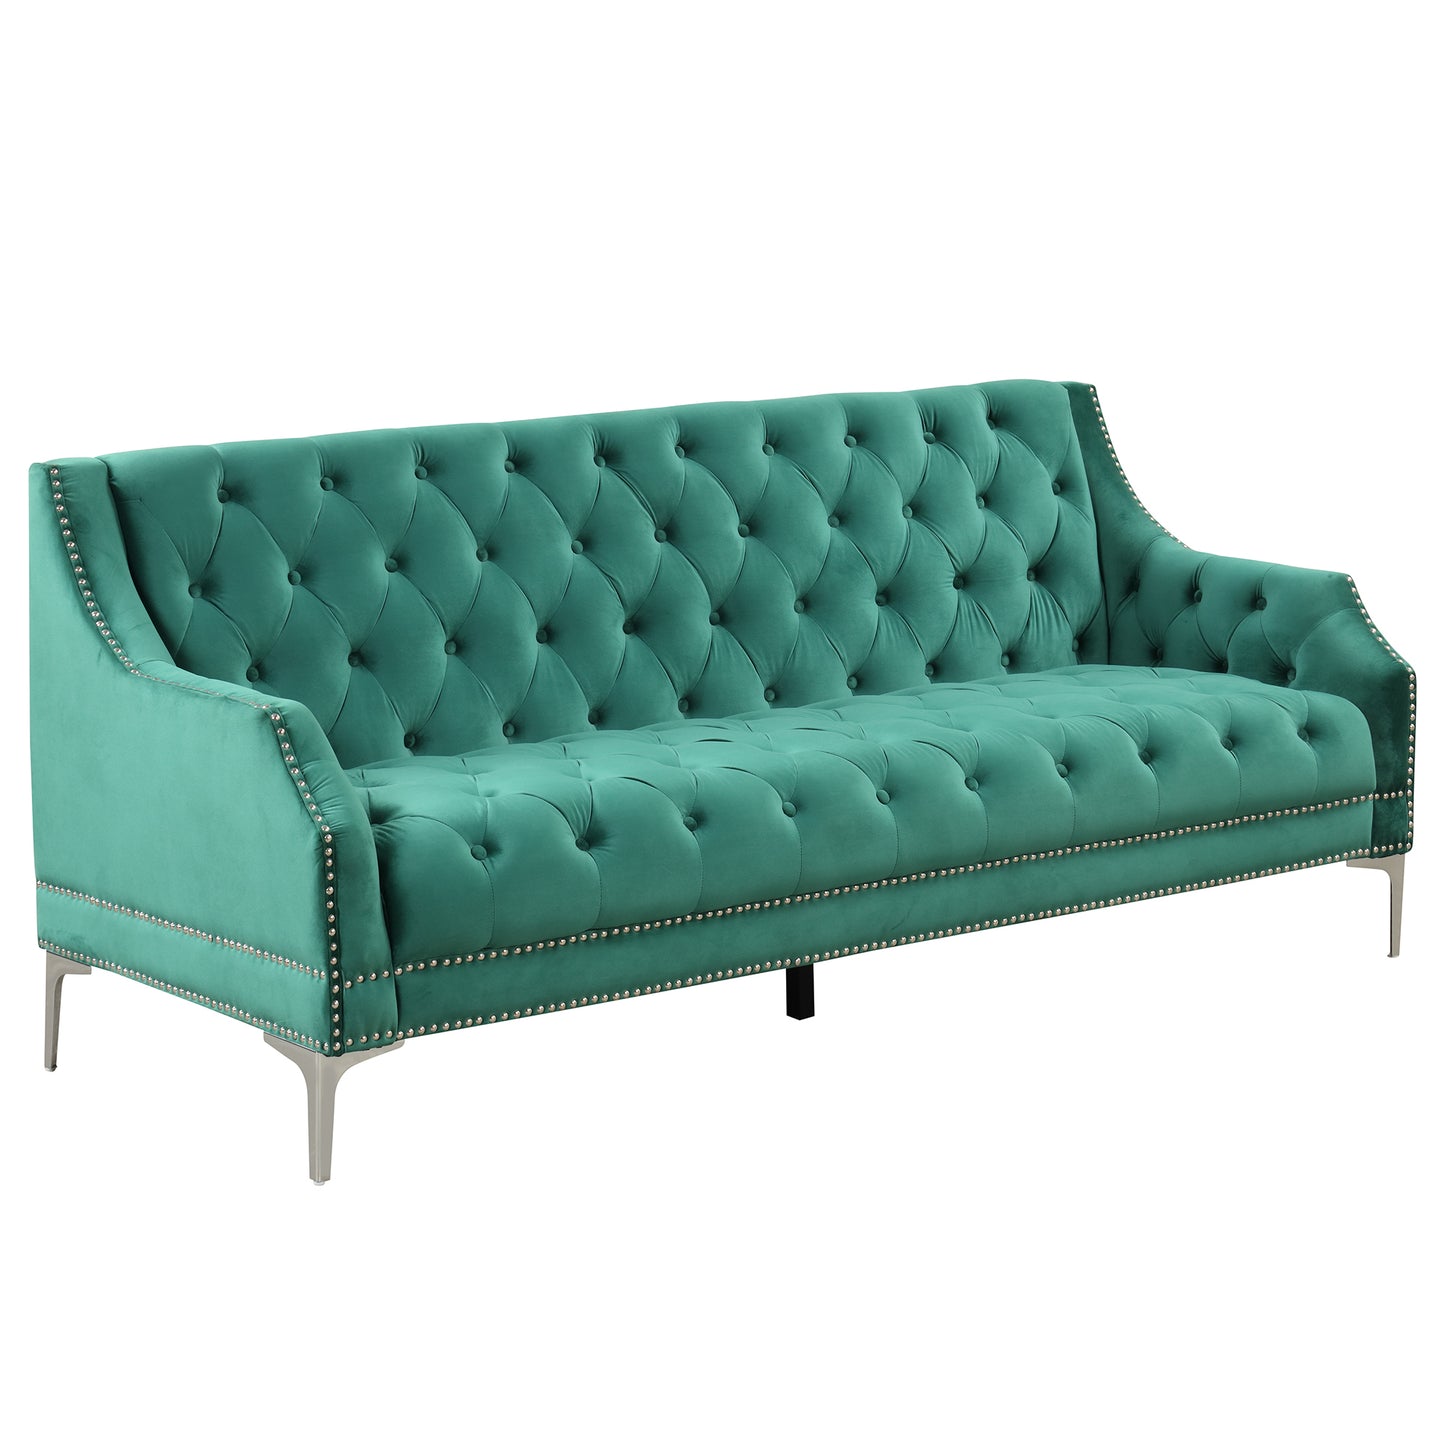 Modern Sofa Dutch Plush Upholstered Sofa with Metal Legs, Button Tufted Back Green - Enova Luxe Home Store